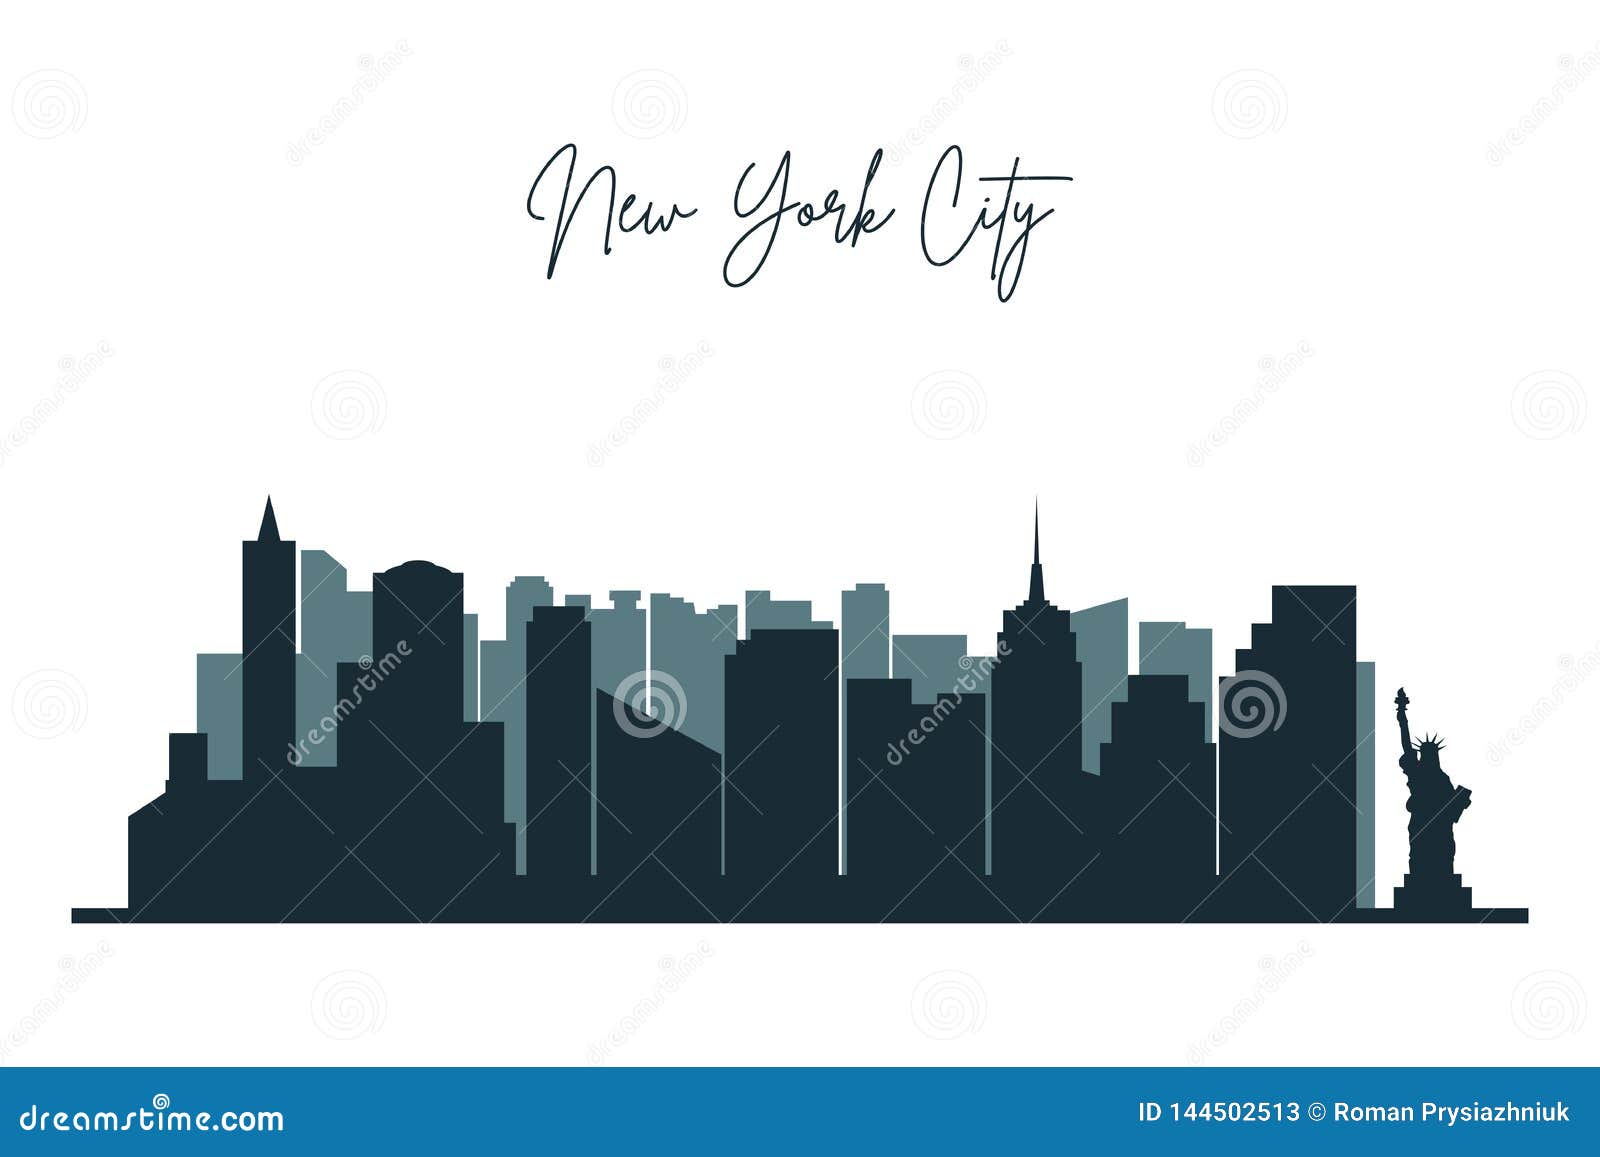 silhouette of new york city. nyc urban skyline with skyscrapers, buildings and liberty statue.